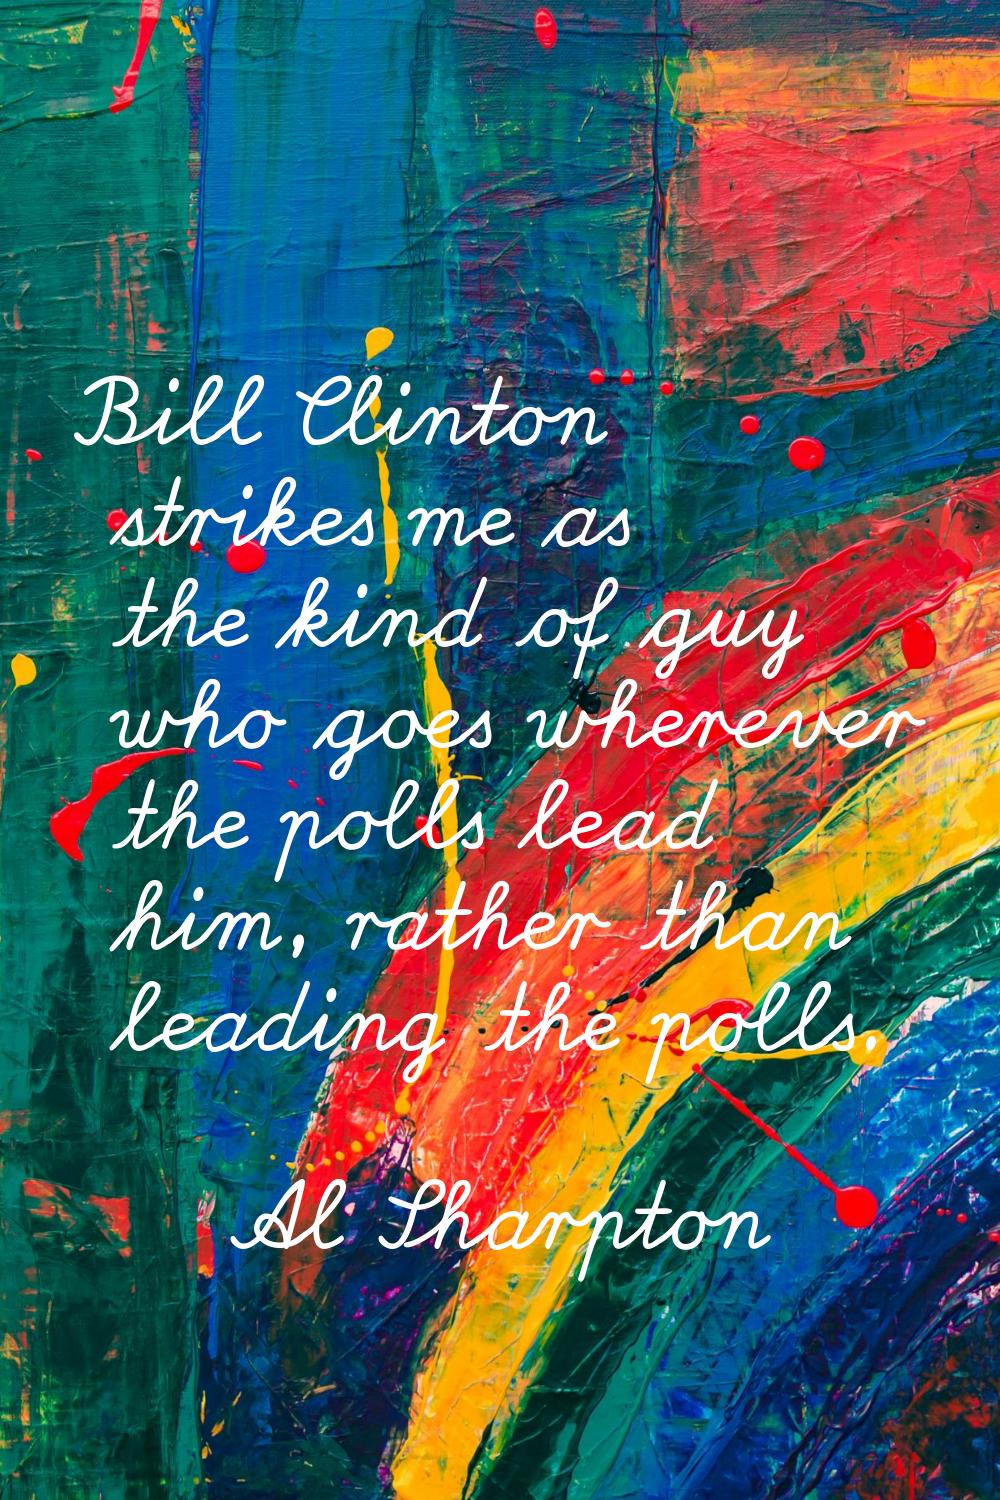 Bill Clinton strikes me as the kind of guy who goes wherever the polls lead him, rather than leadin